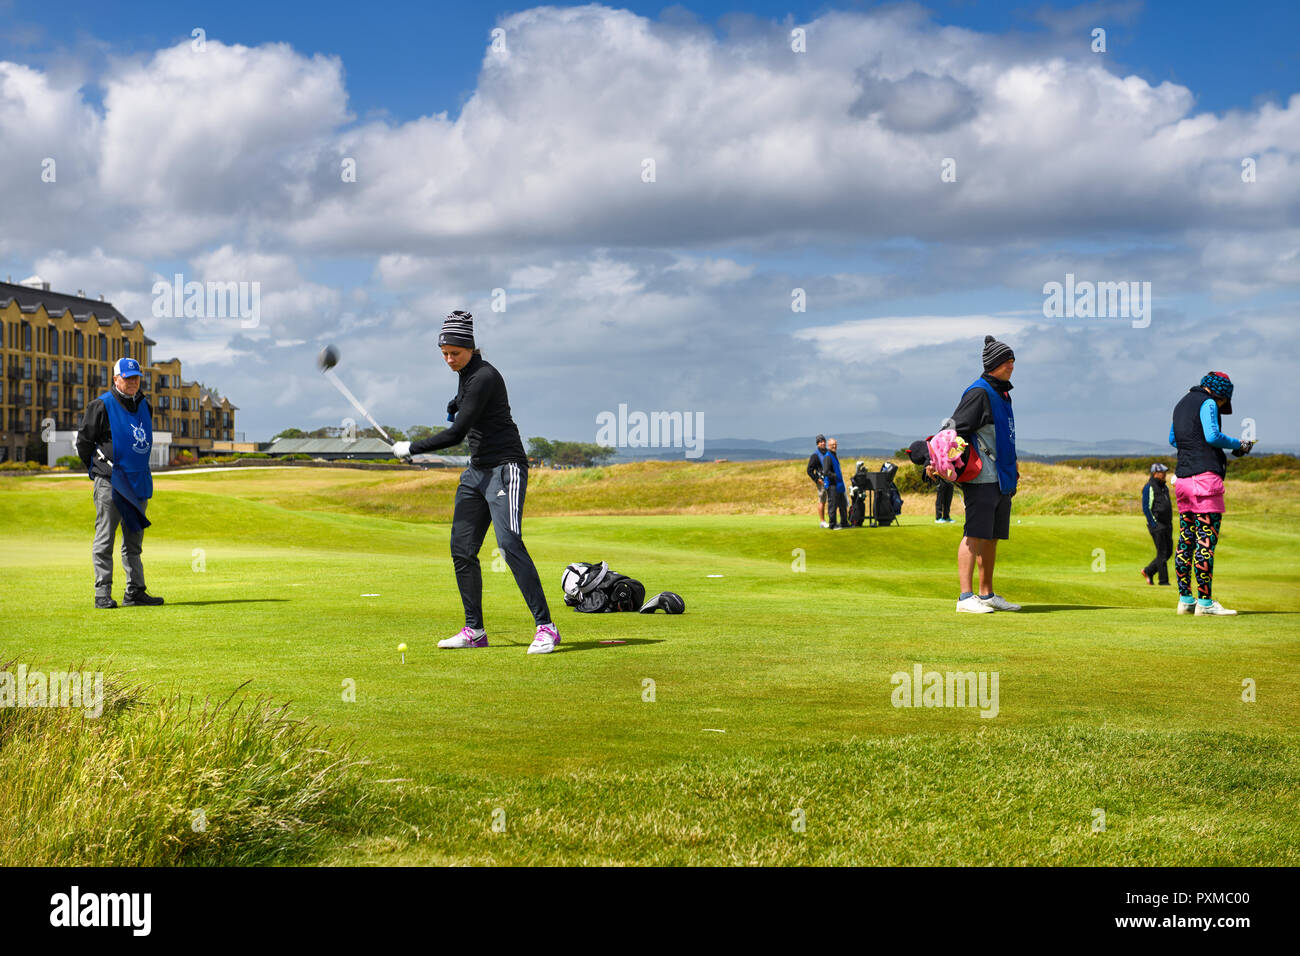 Woman with one arm teeing off on the 18th hole of the Old Course of St Andrews Links the worlds oldest golf course in St Andrews Scotland UK Stock Photo